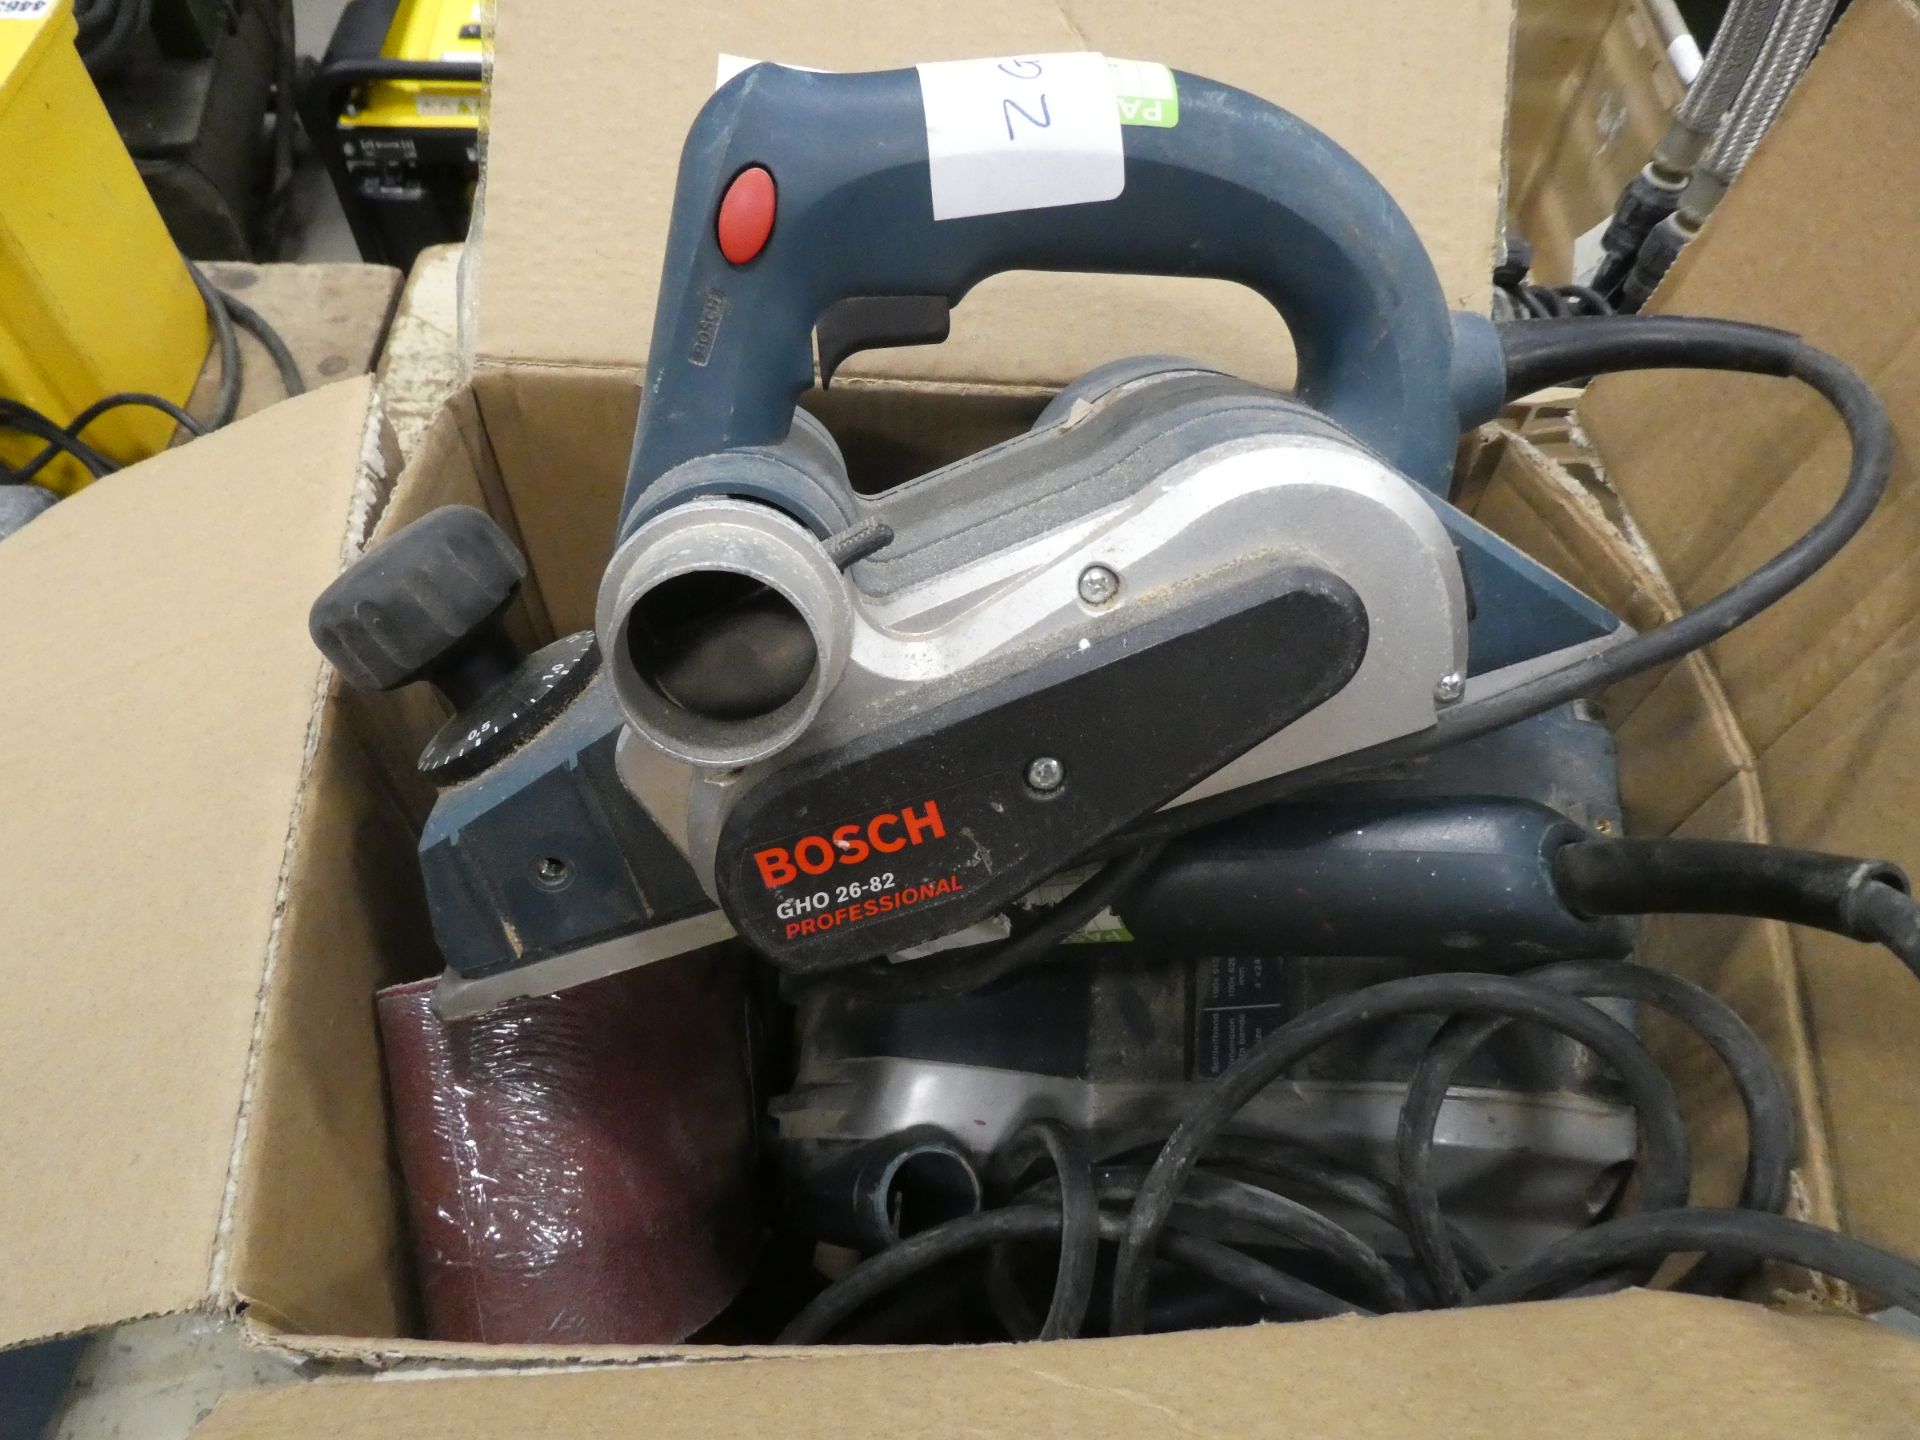 Box containing Bosch sander and electric plane